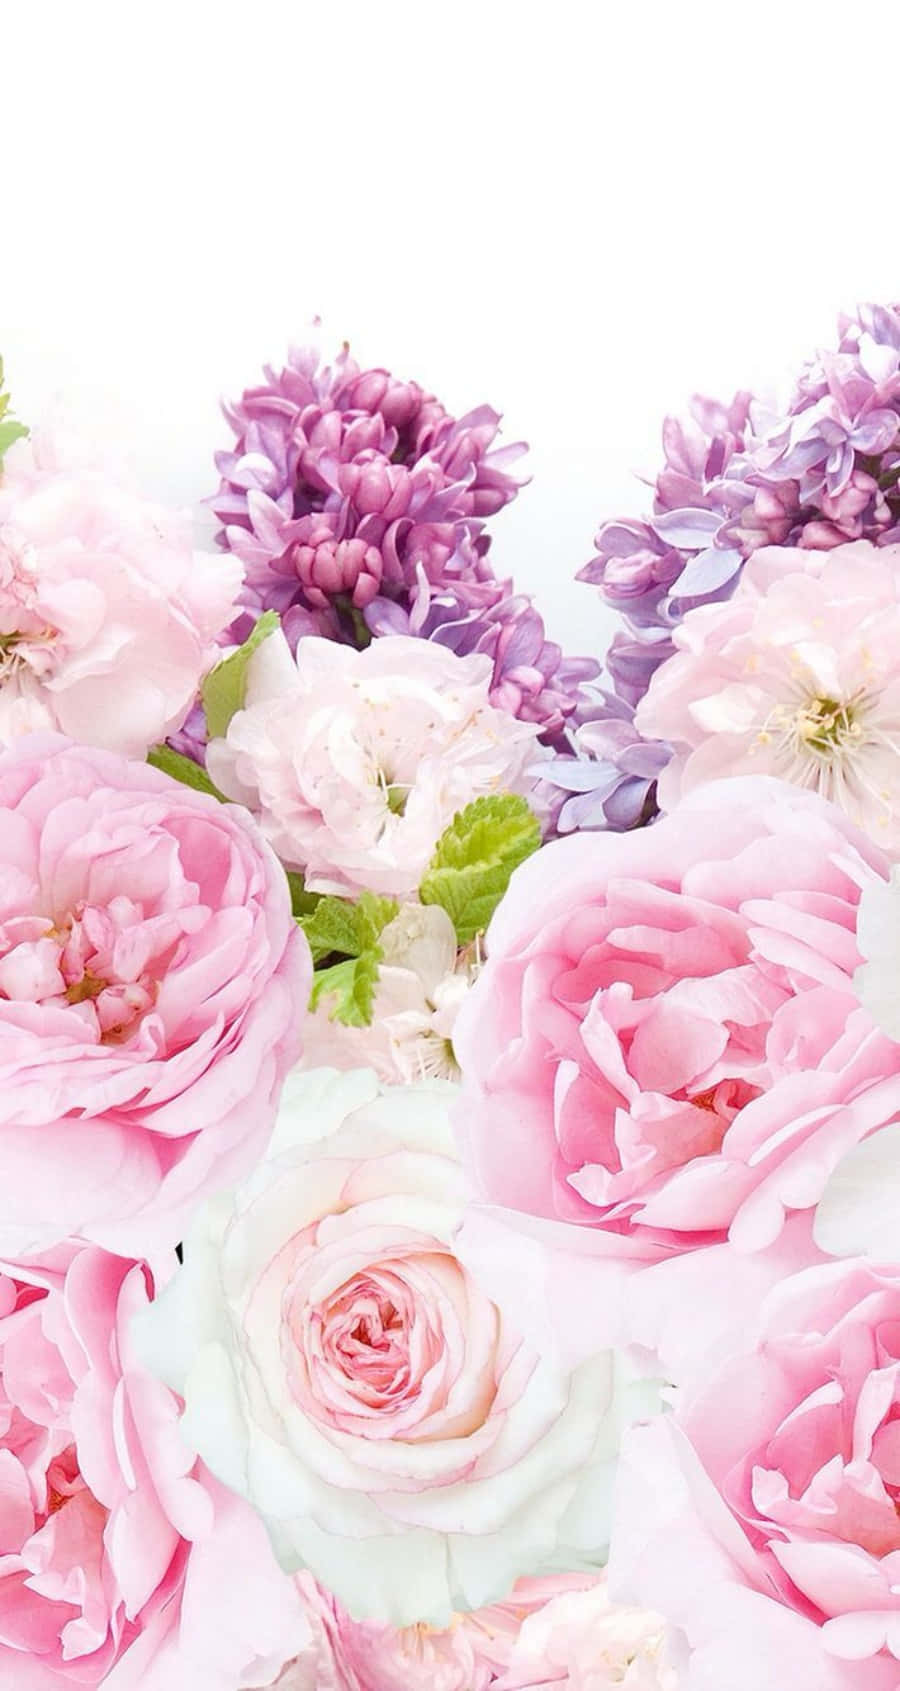 A stunning iphone background featuring a gorgeous pink peony. Wallpaper